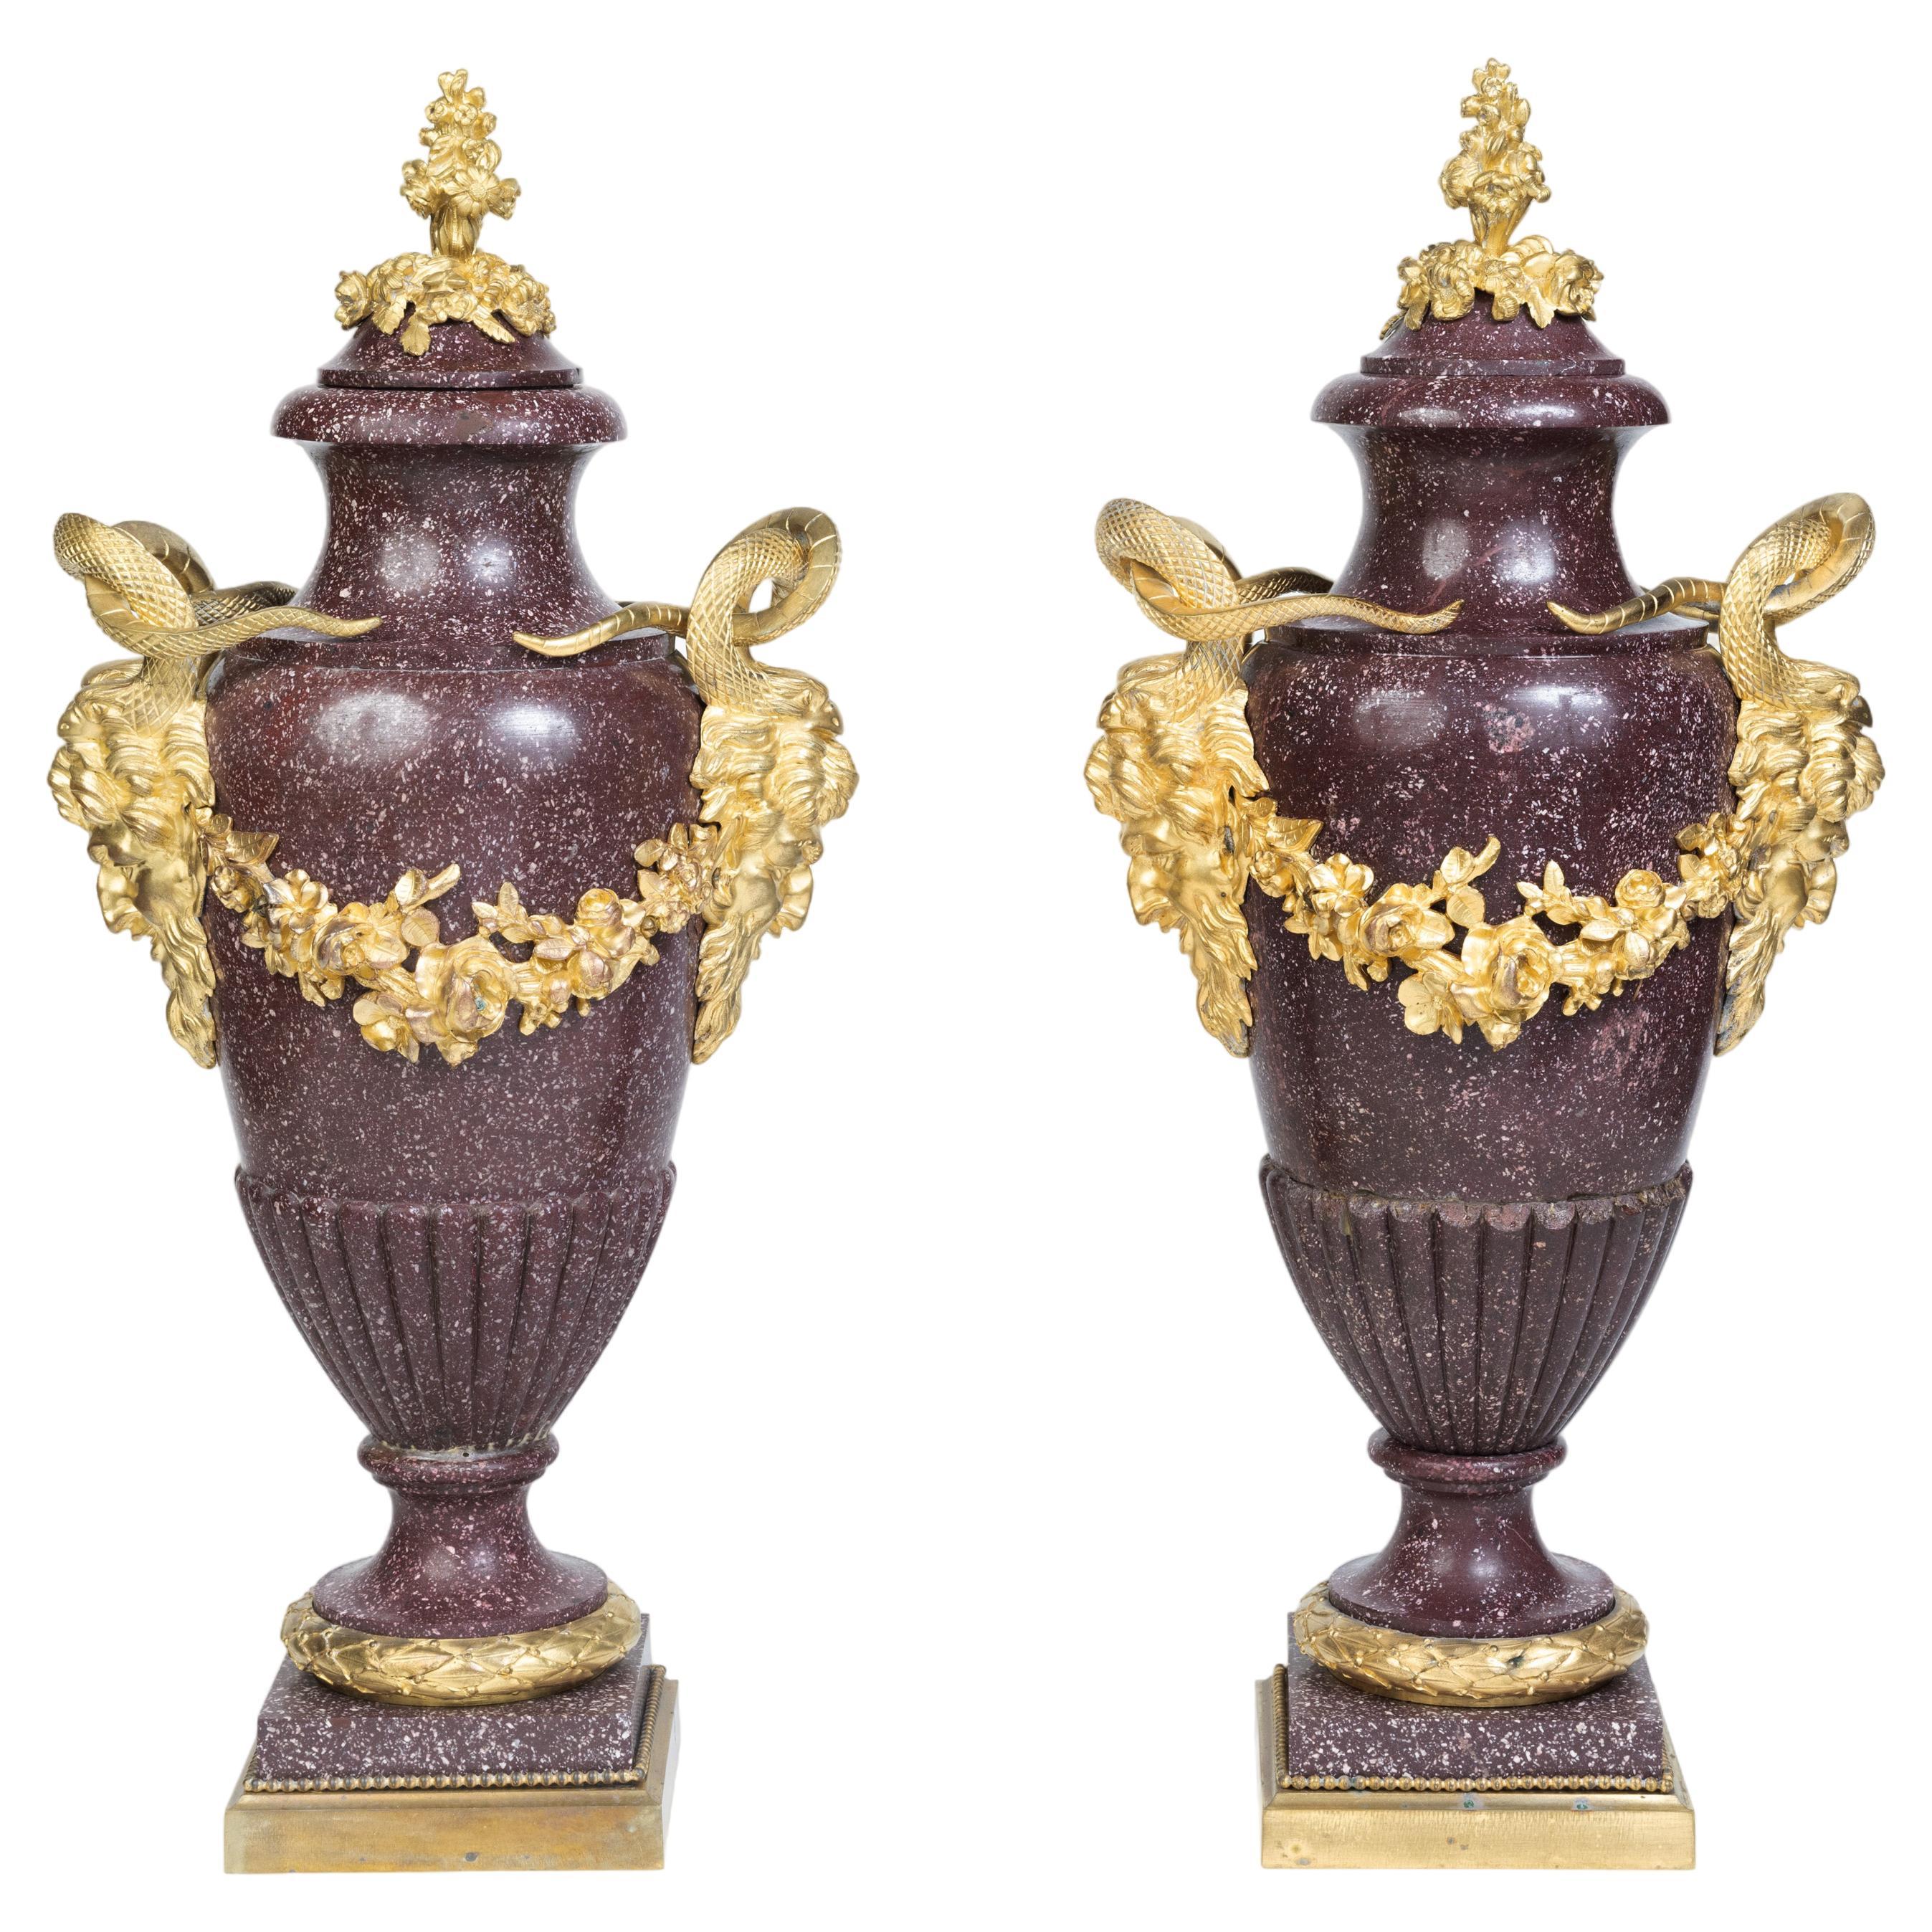 A Large Pair of French Ormolu-Mounted Porphyry Vases For Sale